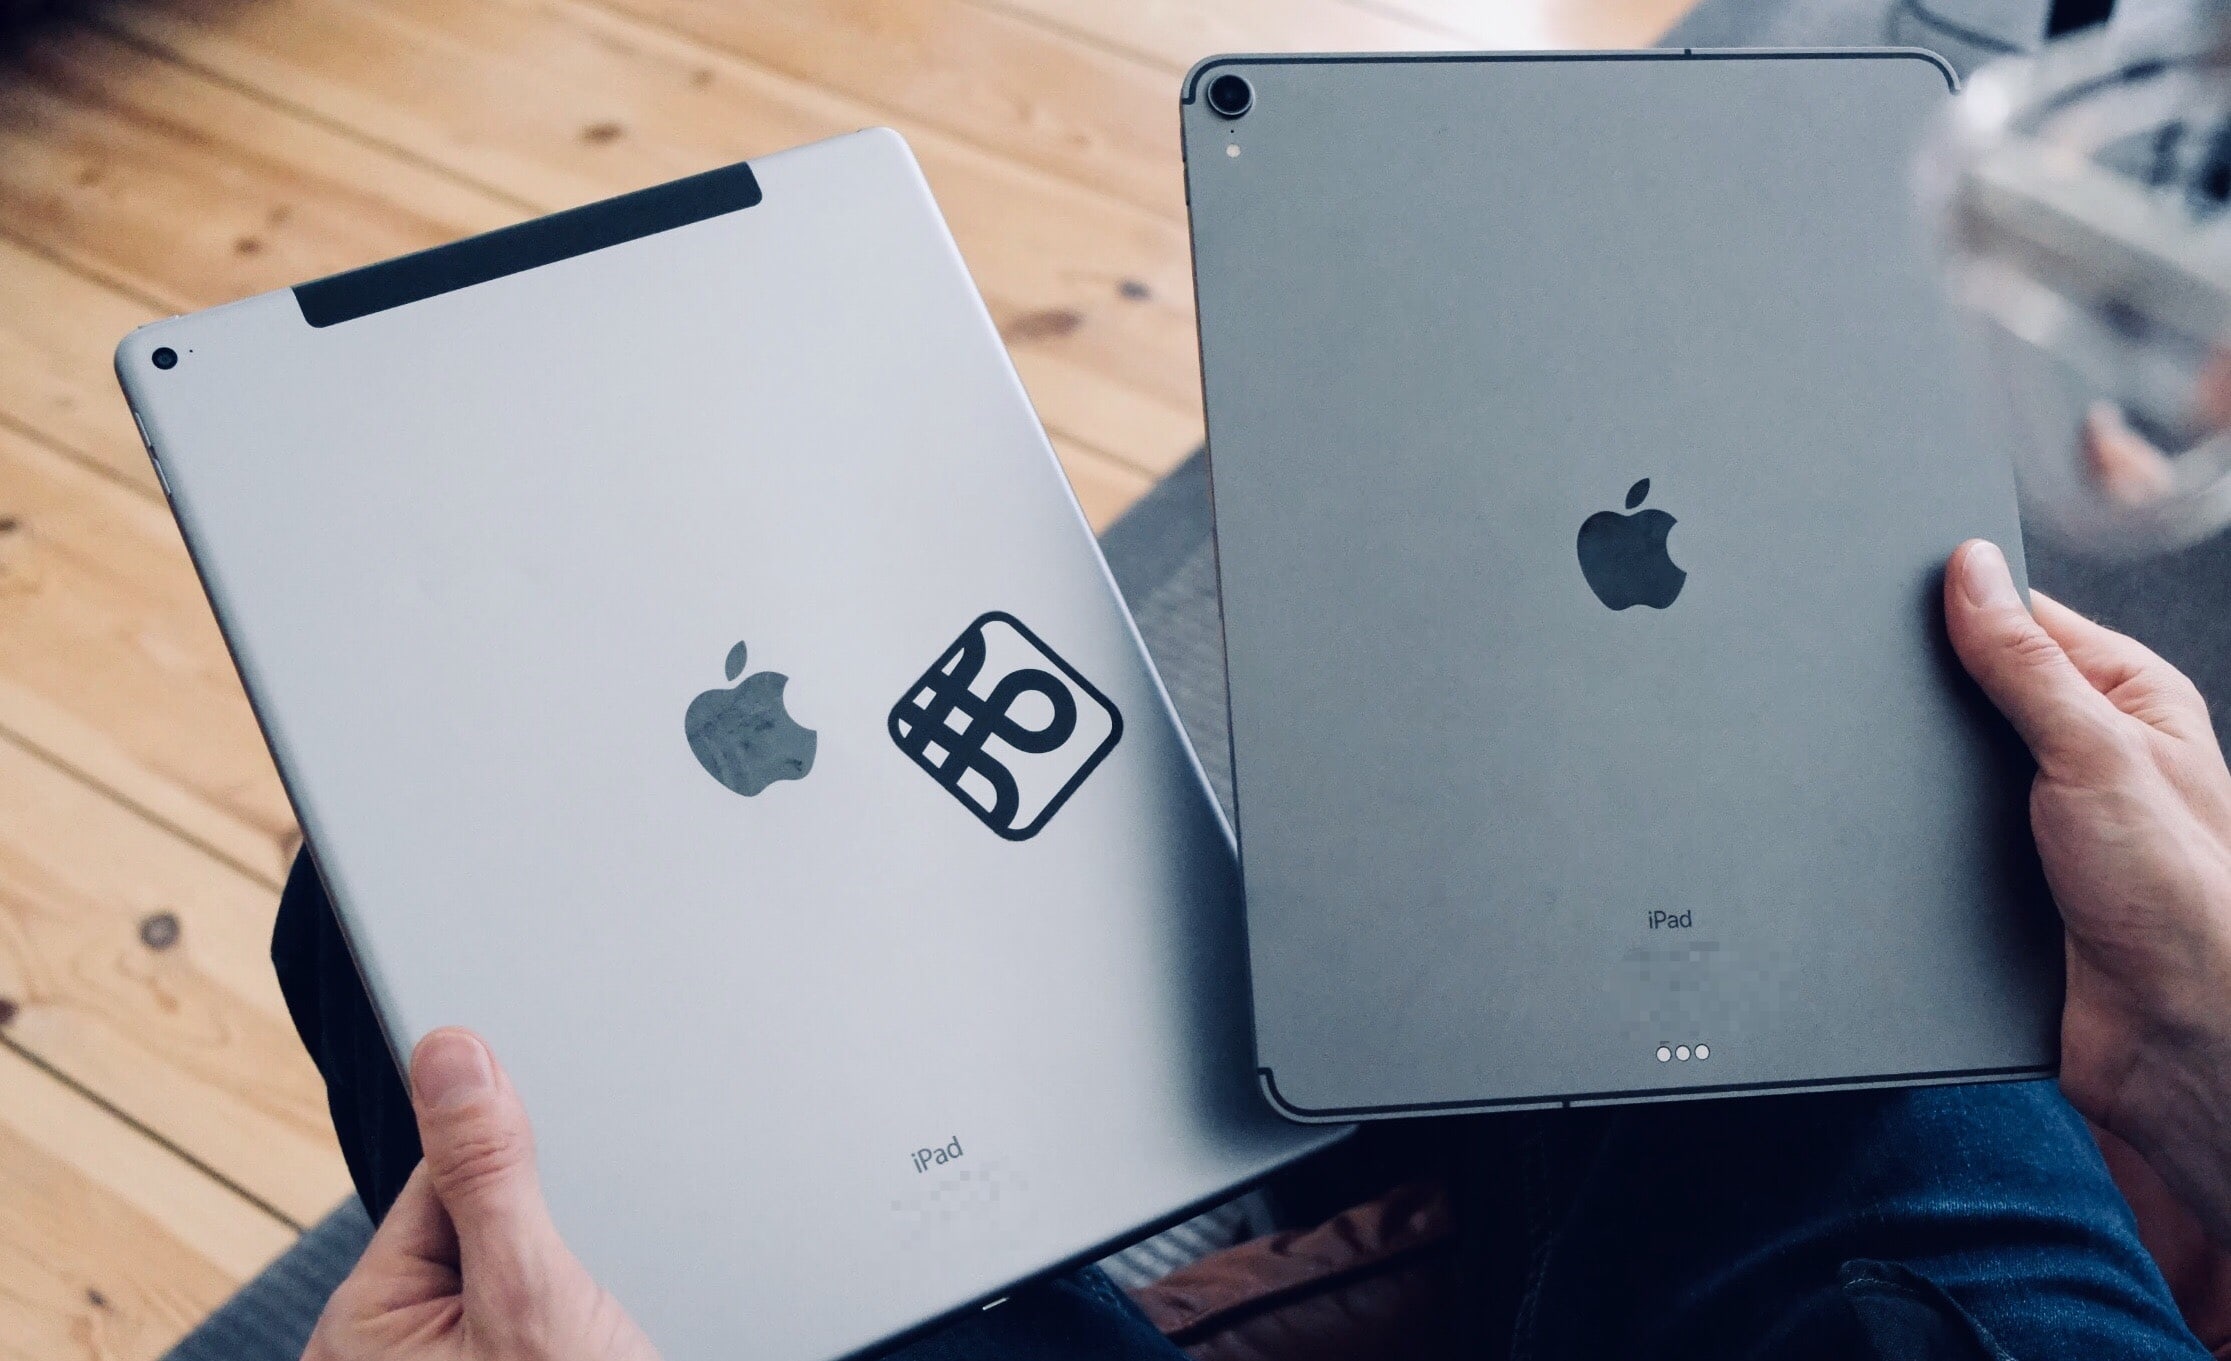 The new iPad makes the old one seem huge and ugly.